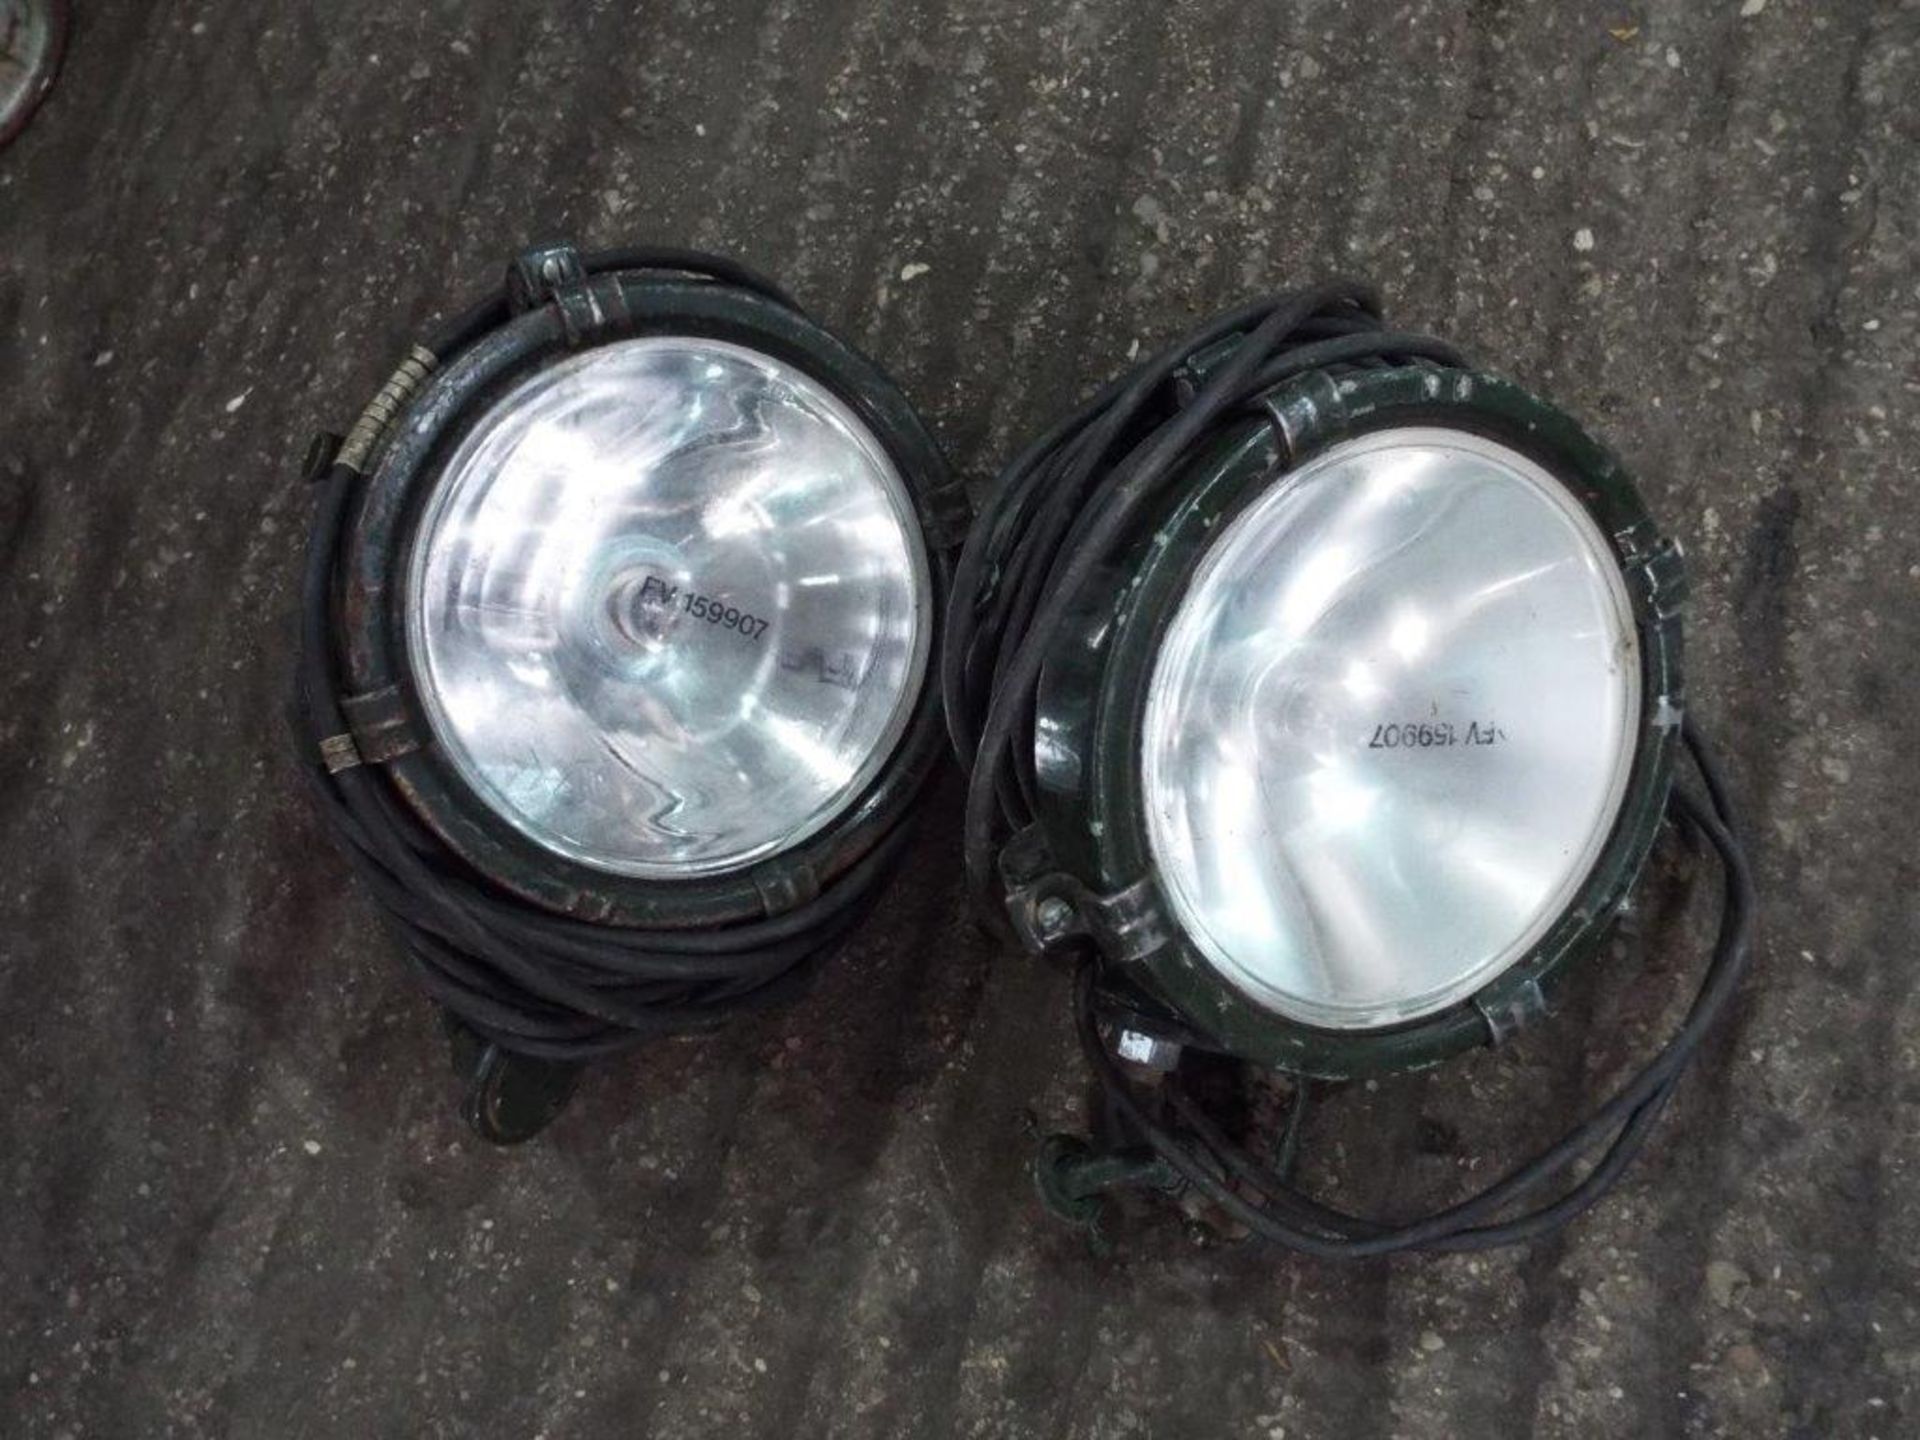 2 x AFV Vehicle Search Lamps